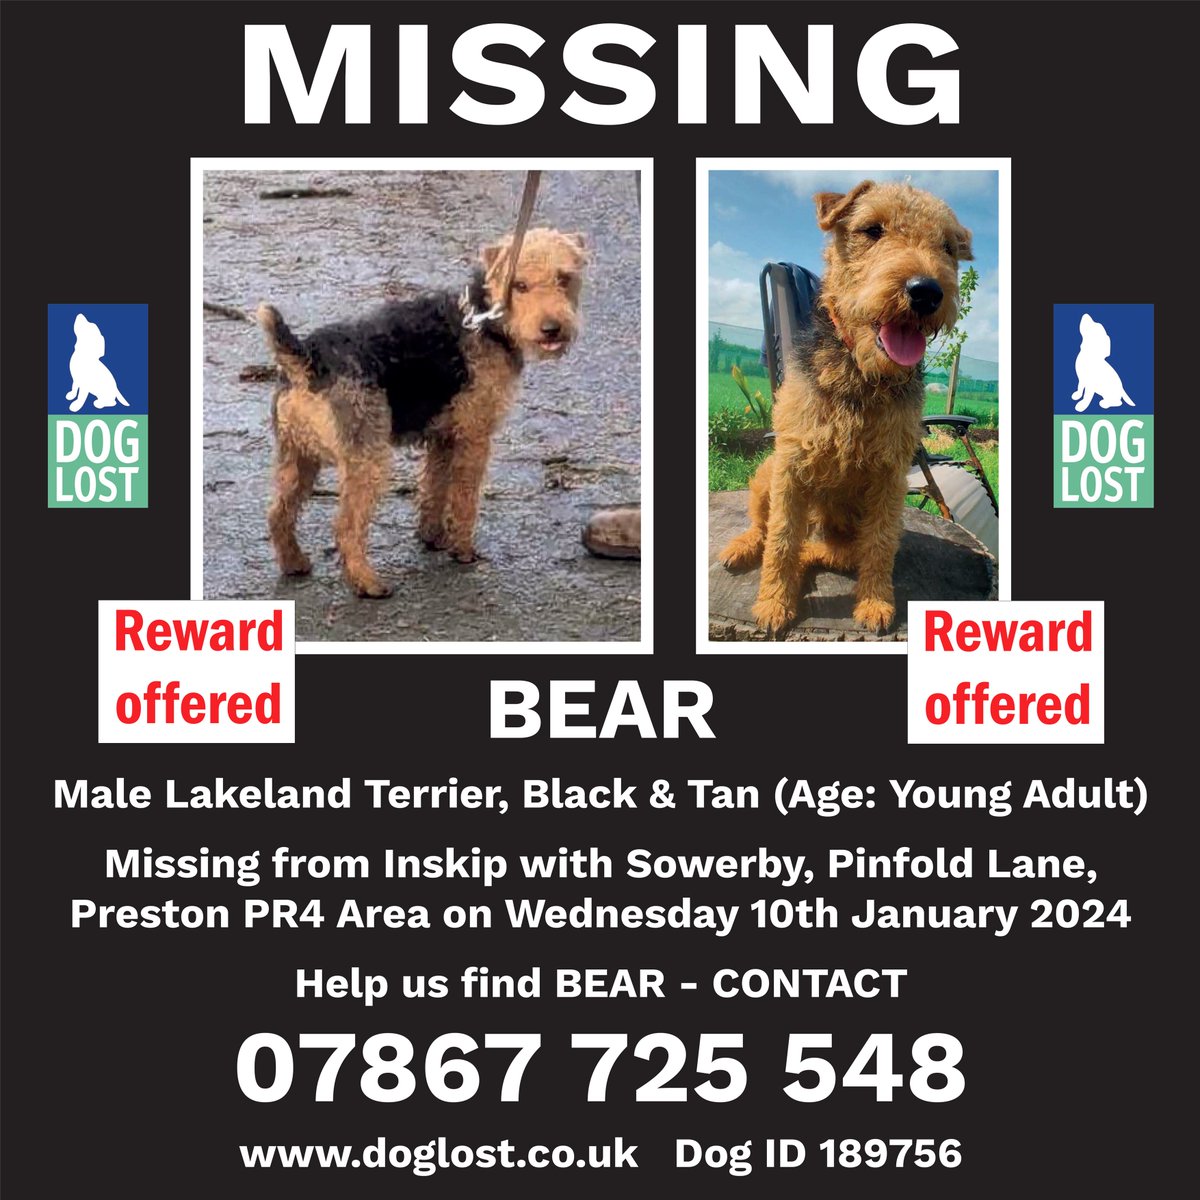 Hi all, 

We've spotted Bear has gone missing and want to help reunite him with his owner. We'd really appreciate if you could keep an eye out for this little guy!

#BringBearHome